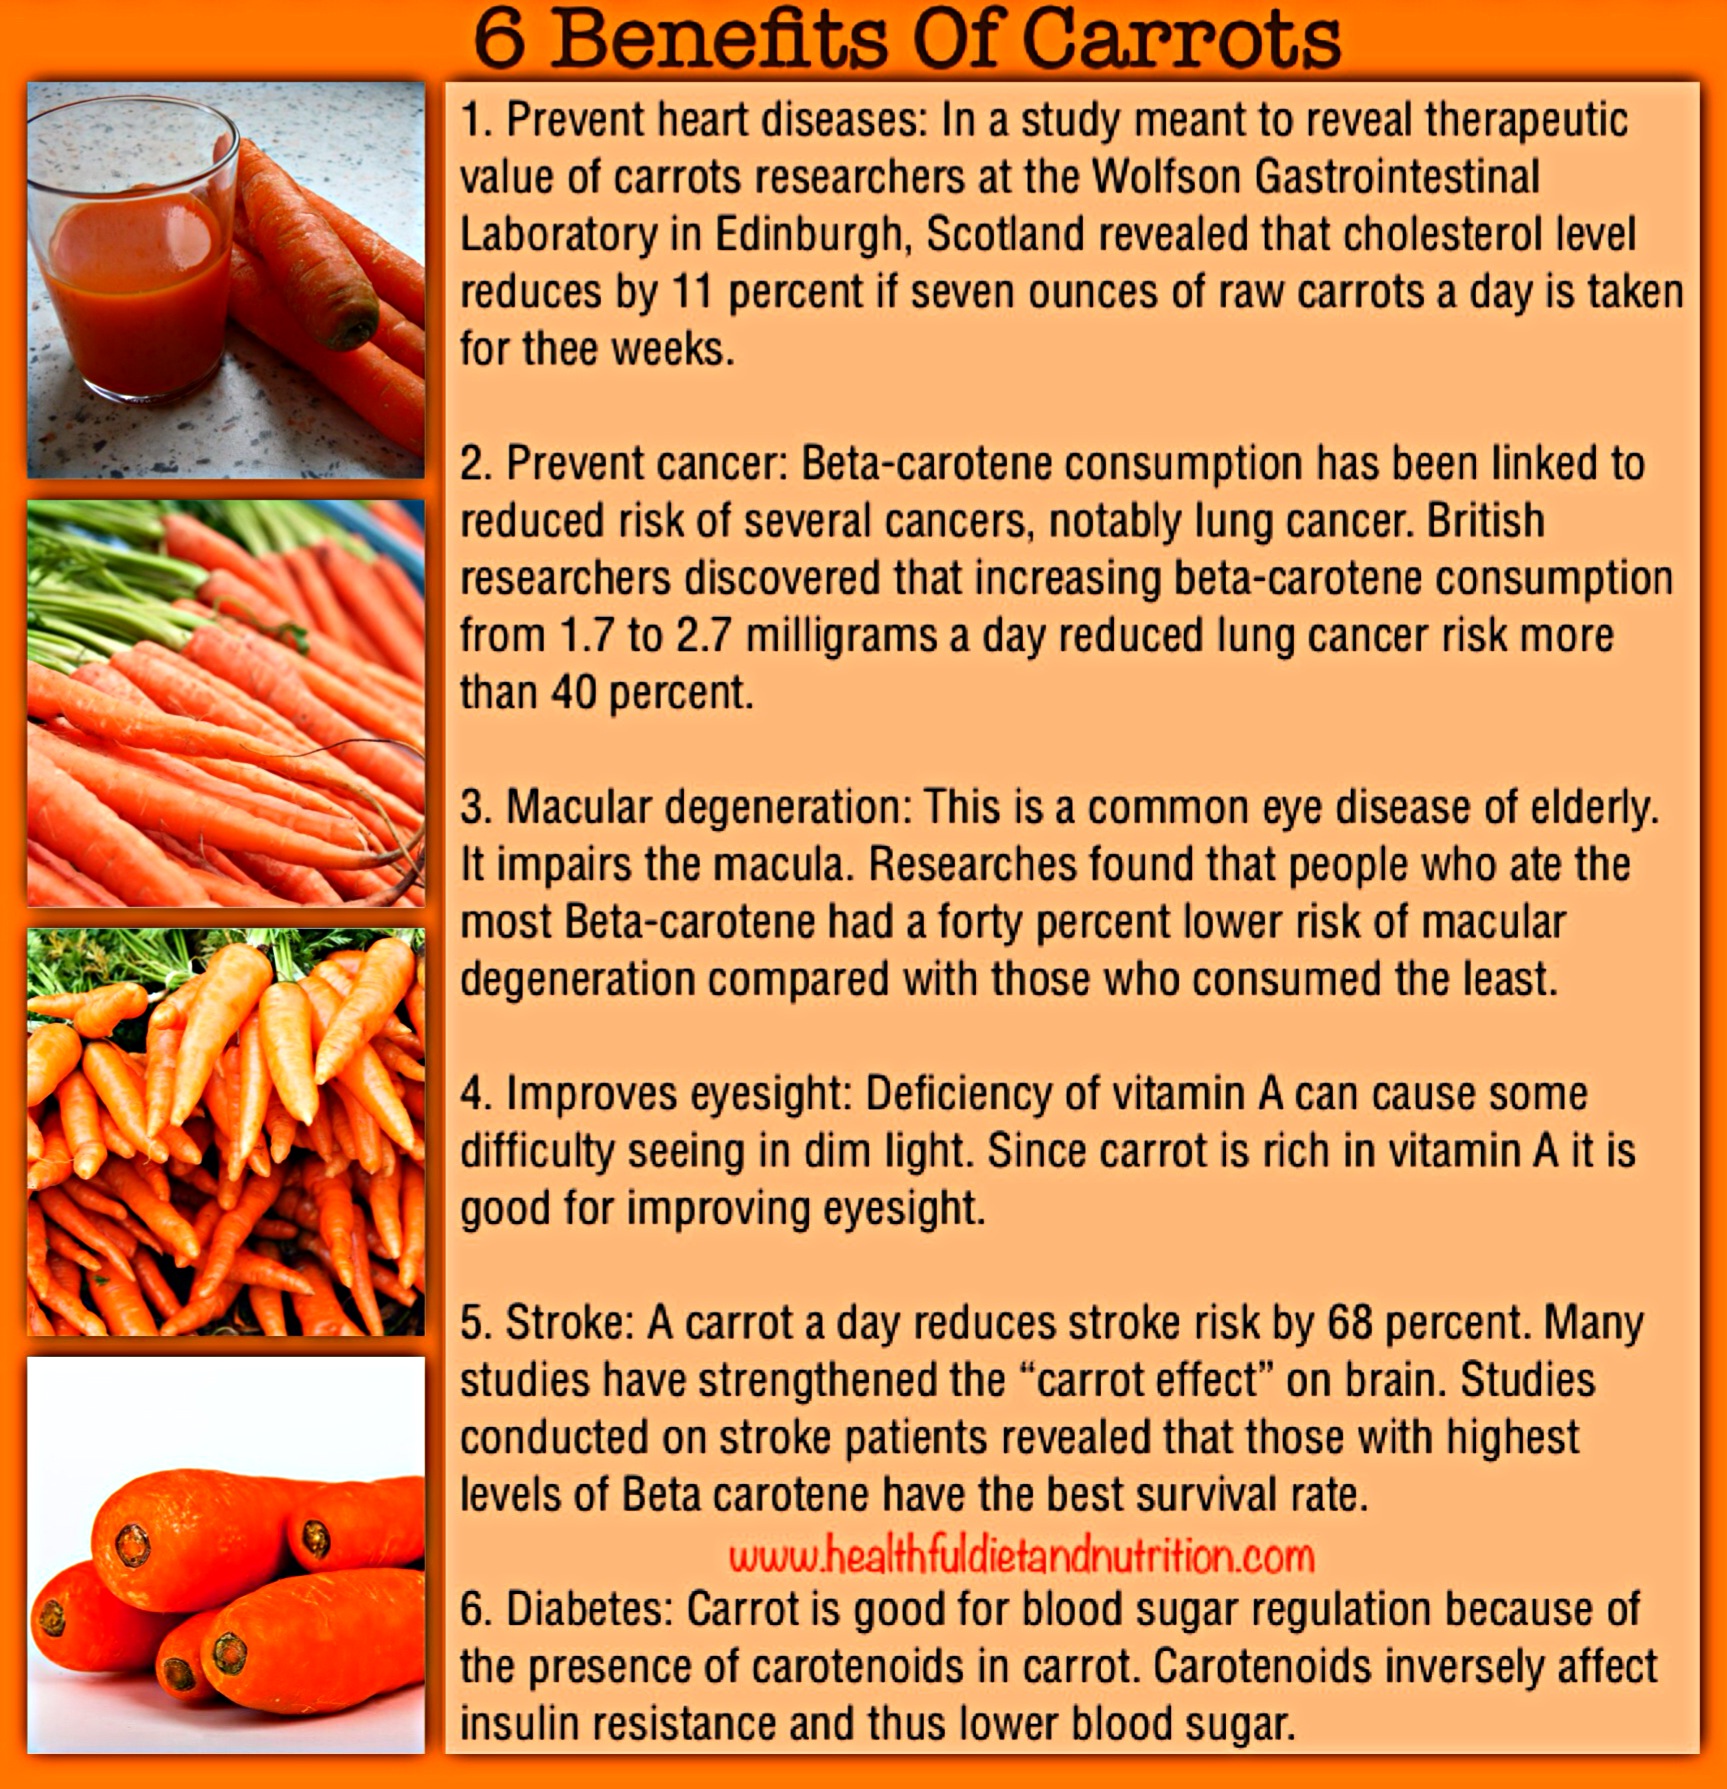 6 Benefits Of Carrot